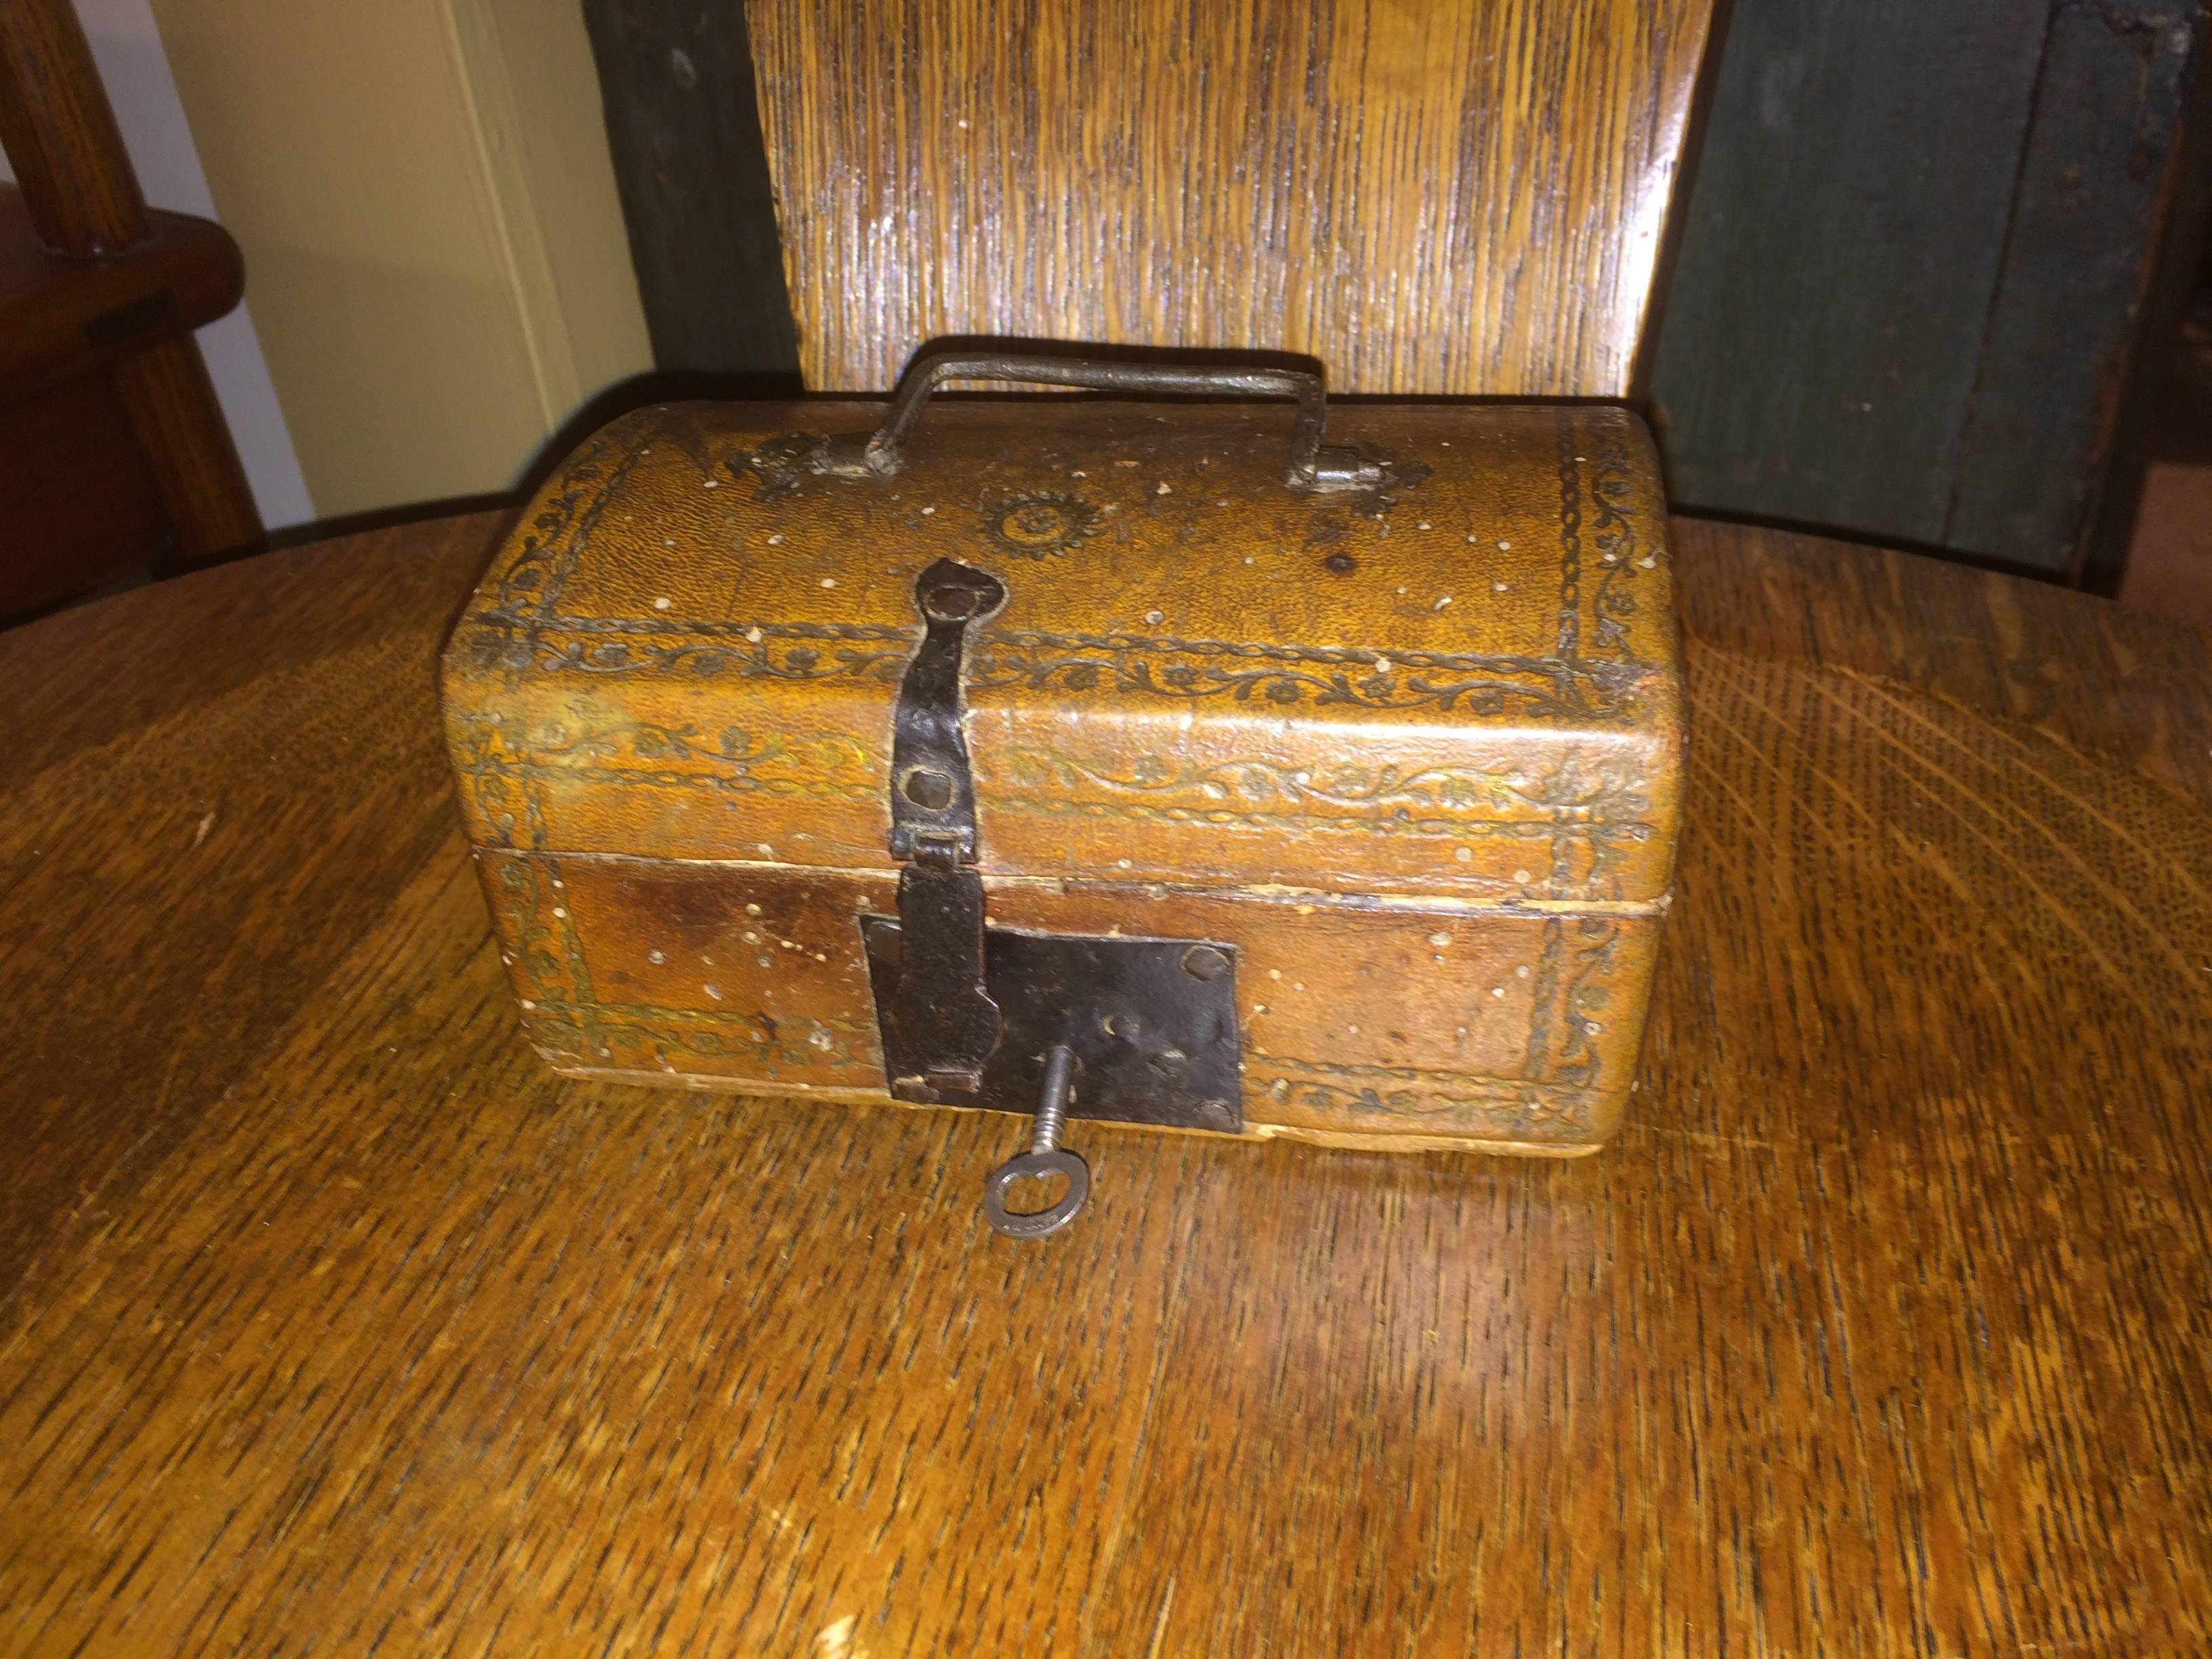 An all original French tooled and gilt leather box with wrought iron handle, hasp and lock plate. Lined with early manuscript leaves. 